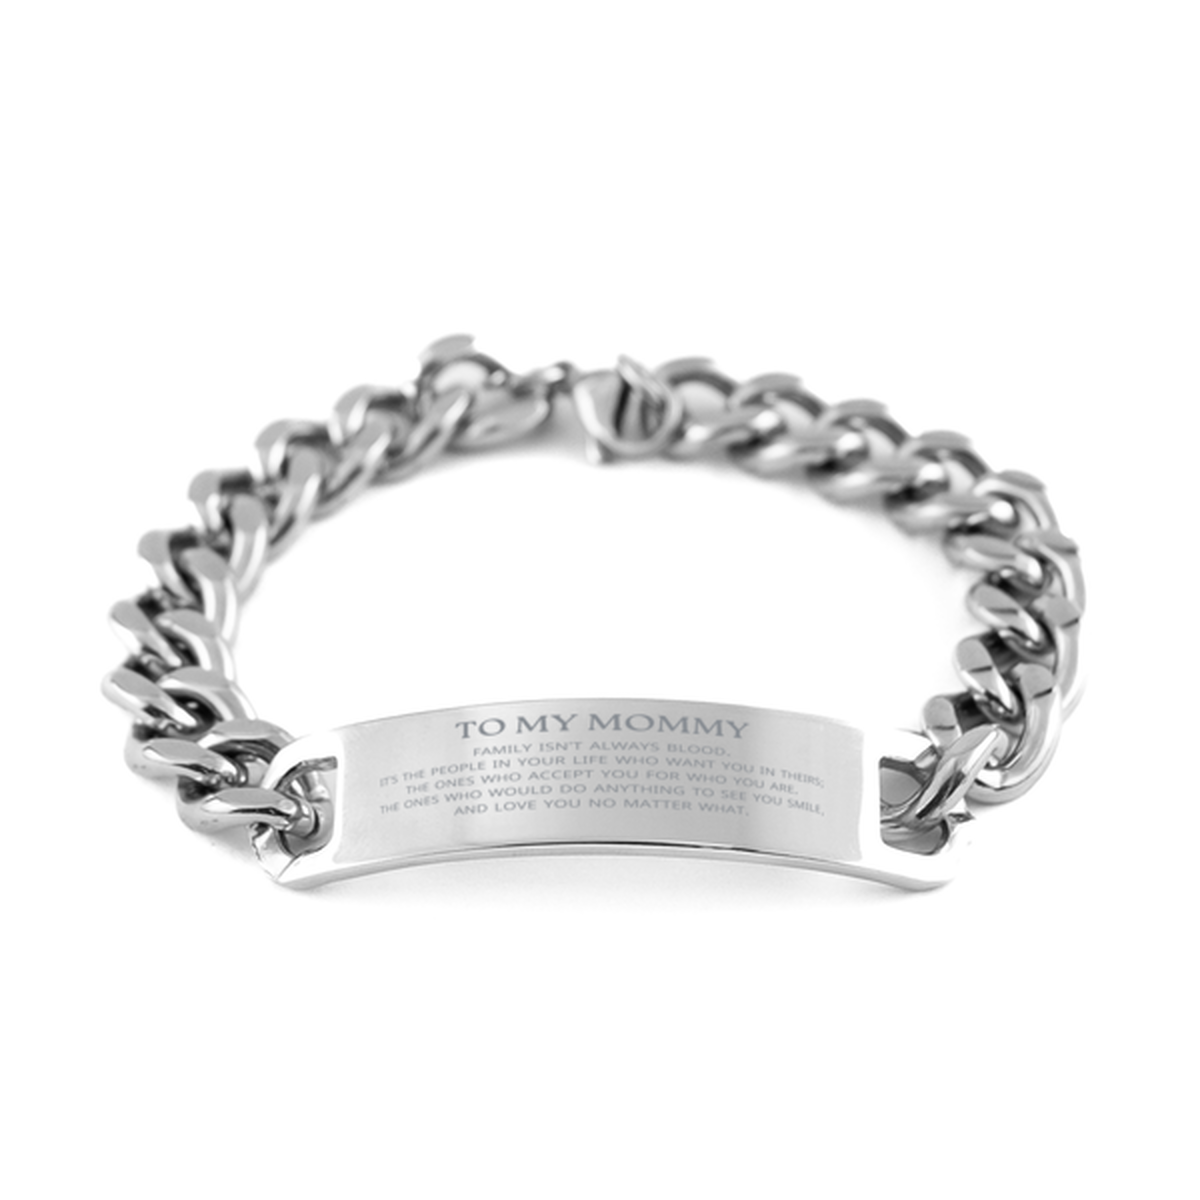 To My Mommy Gifts, Family isn't always blood, Mommy Cuban Chain Stainless Steel Bracelet, Birthday Christmas Unique Present For Mommy